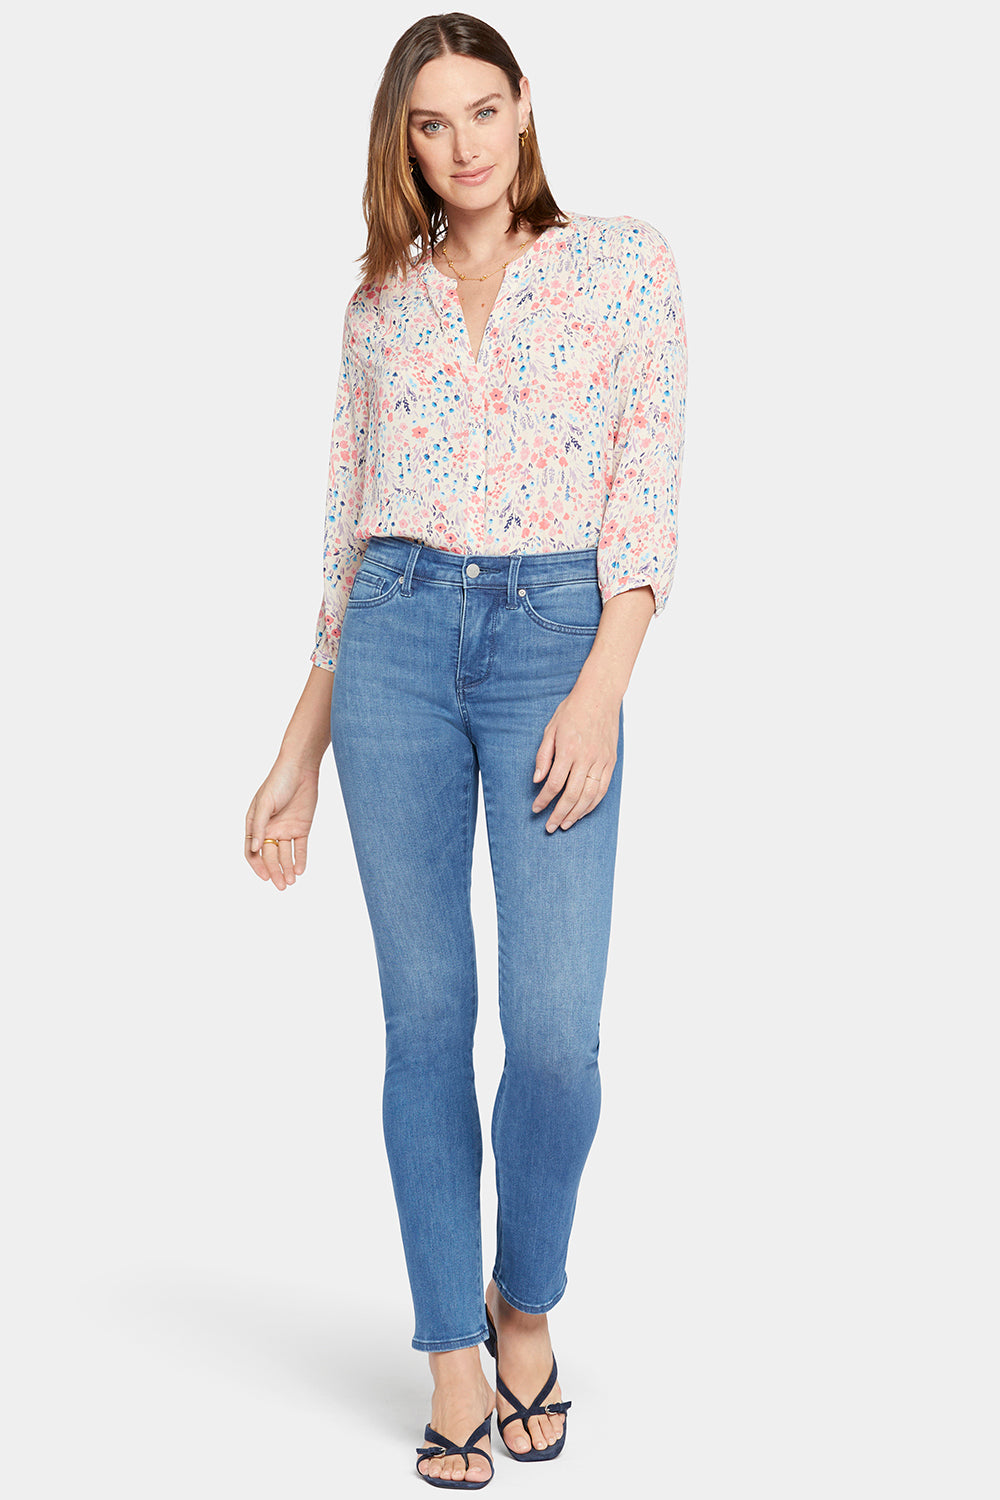 Le Silhouette Sheri Slim Jeans In Tall With 34